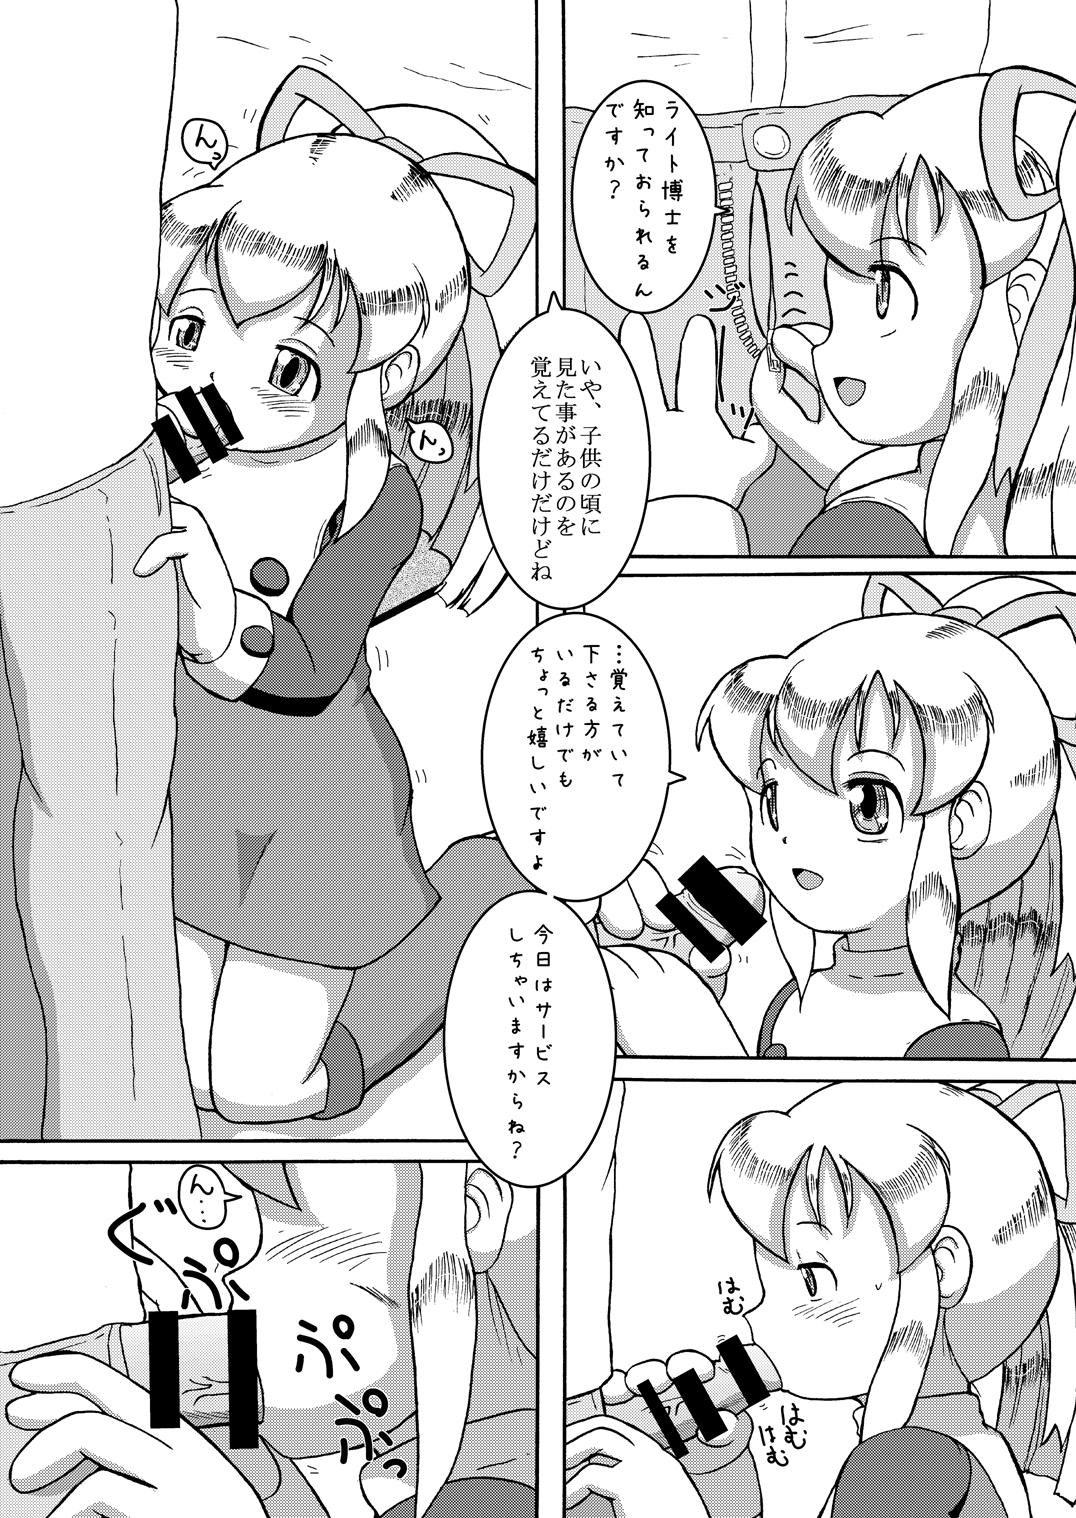 Gros Seins LoveRoLL+DDD - Megaman Cyberbots Cheating Wife - Page 4